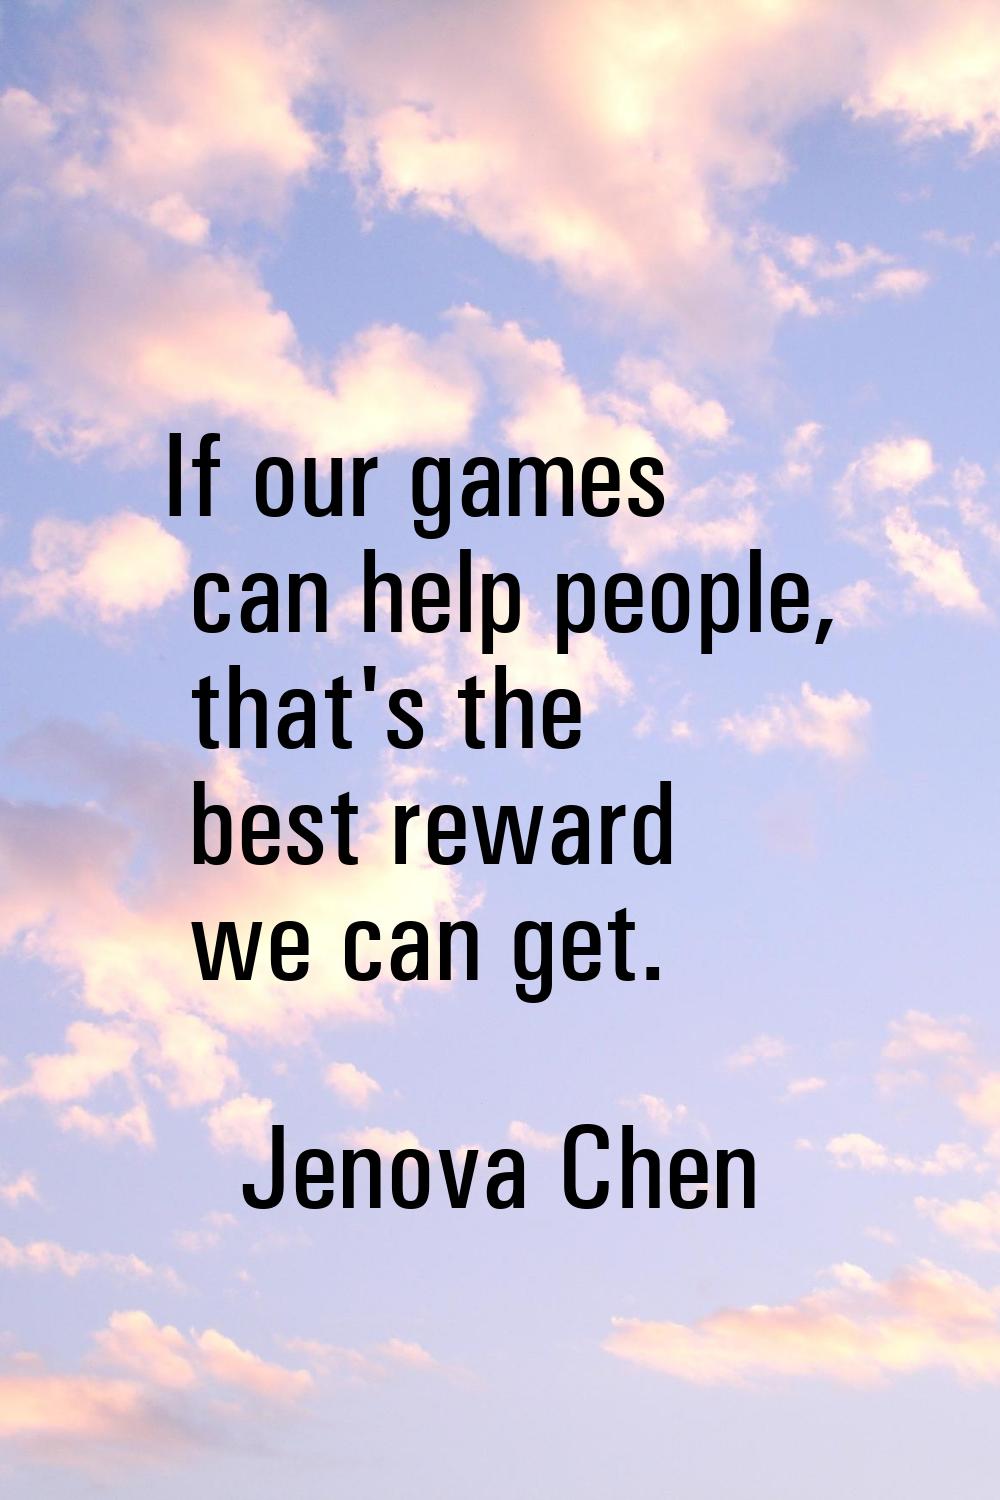 If our games can help people, that's the best reward we can get.